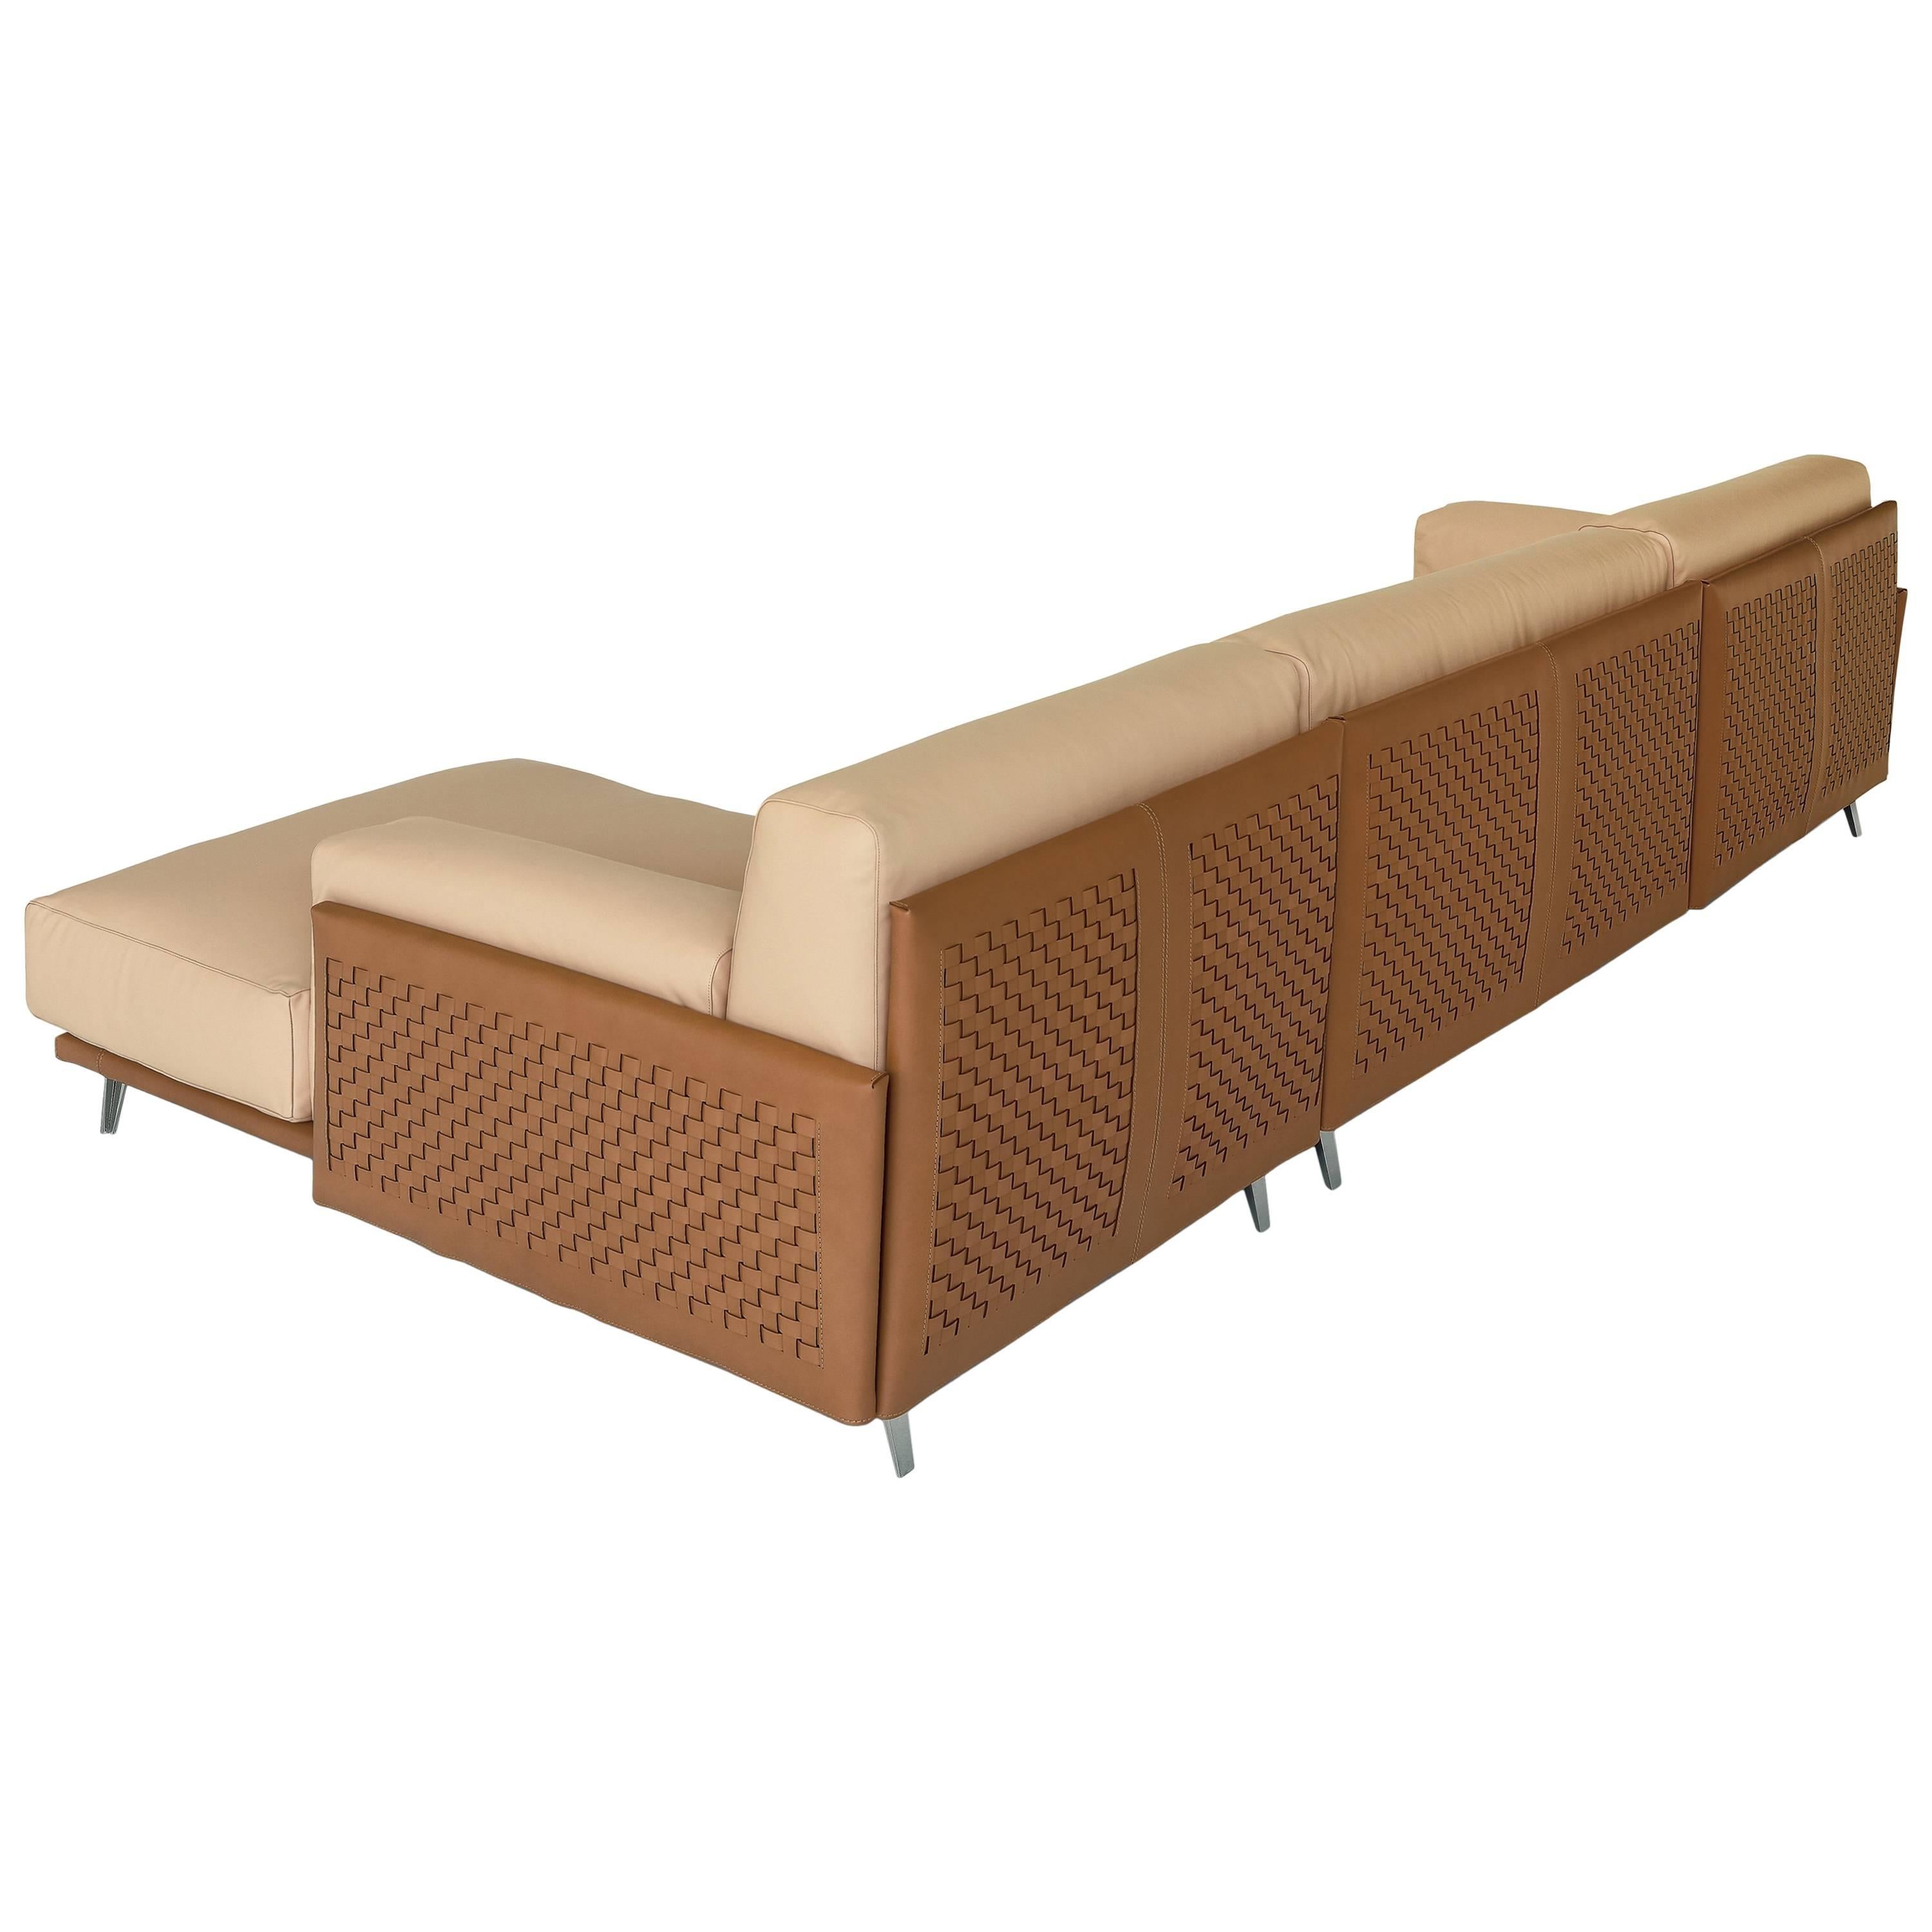 The seating system Frame has a comfortable line; its structure can be enriched by the manual interlacement of the cowhide, for giving to the sofa an elegant scene. Seat and back cushions in feather with polyurethane foam insert, for a soft and